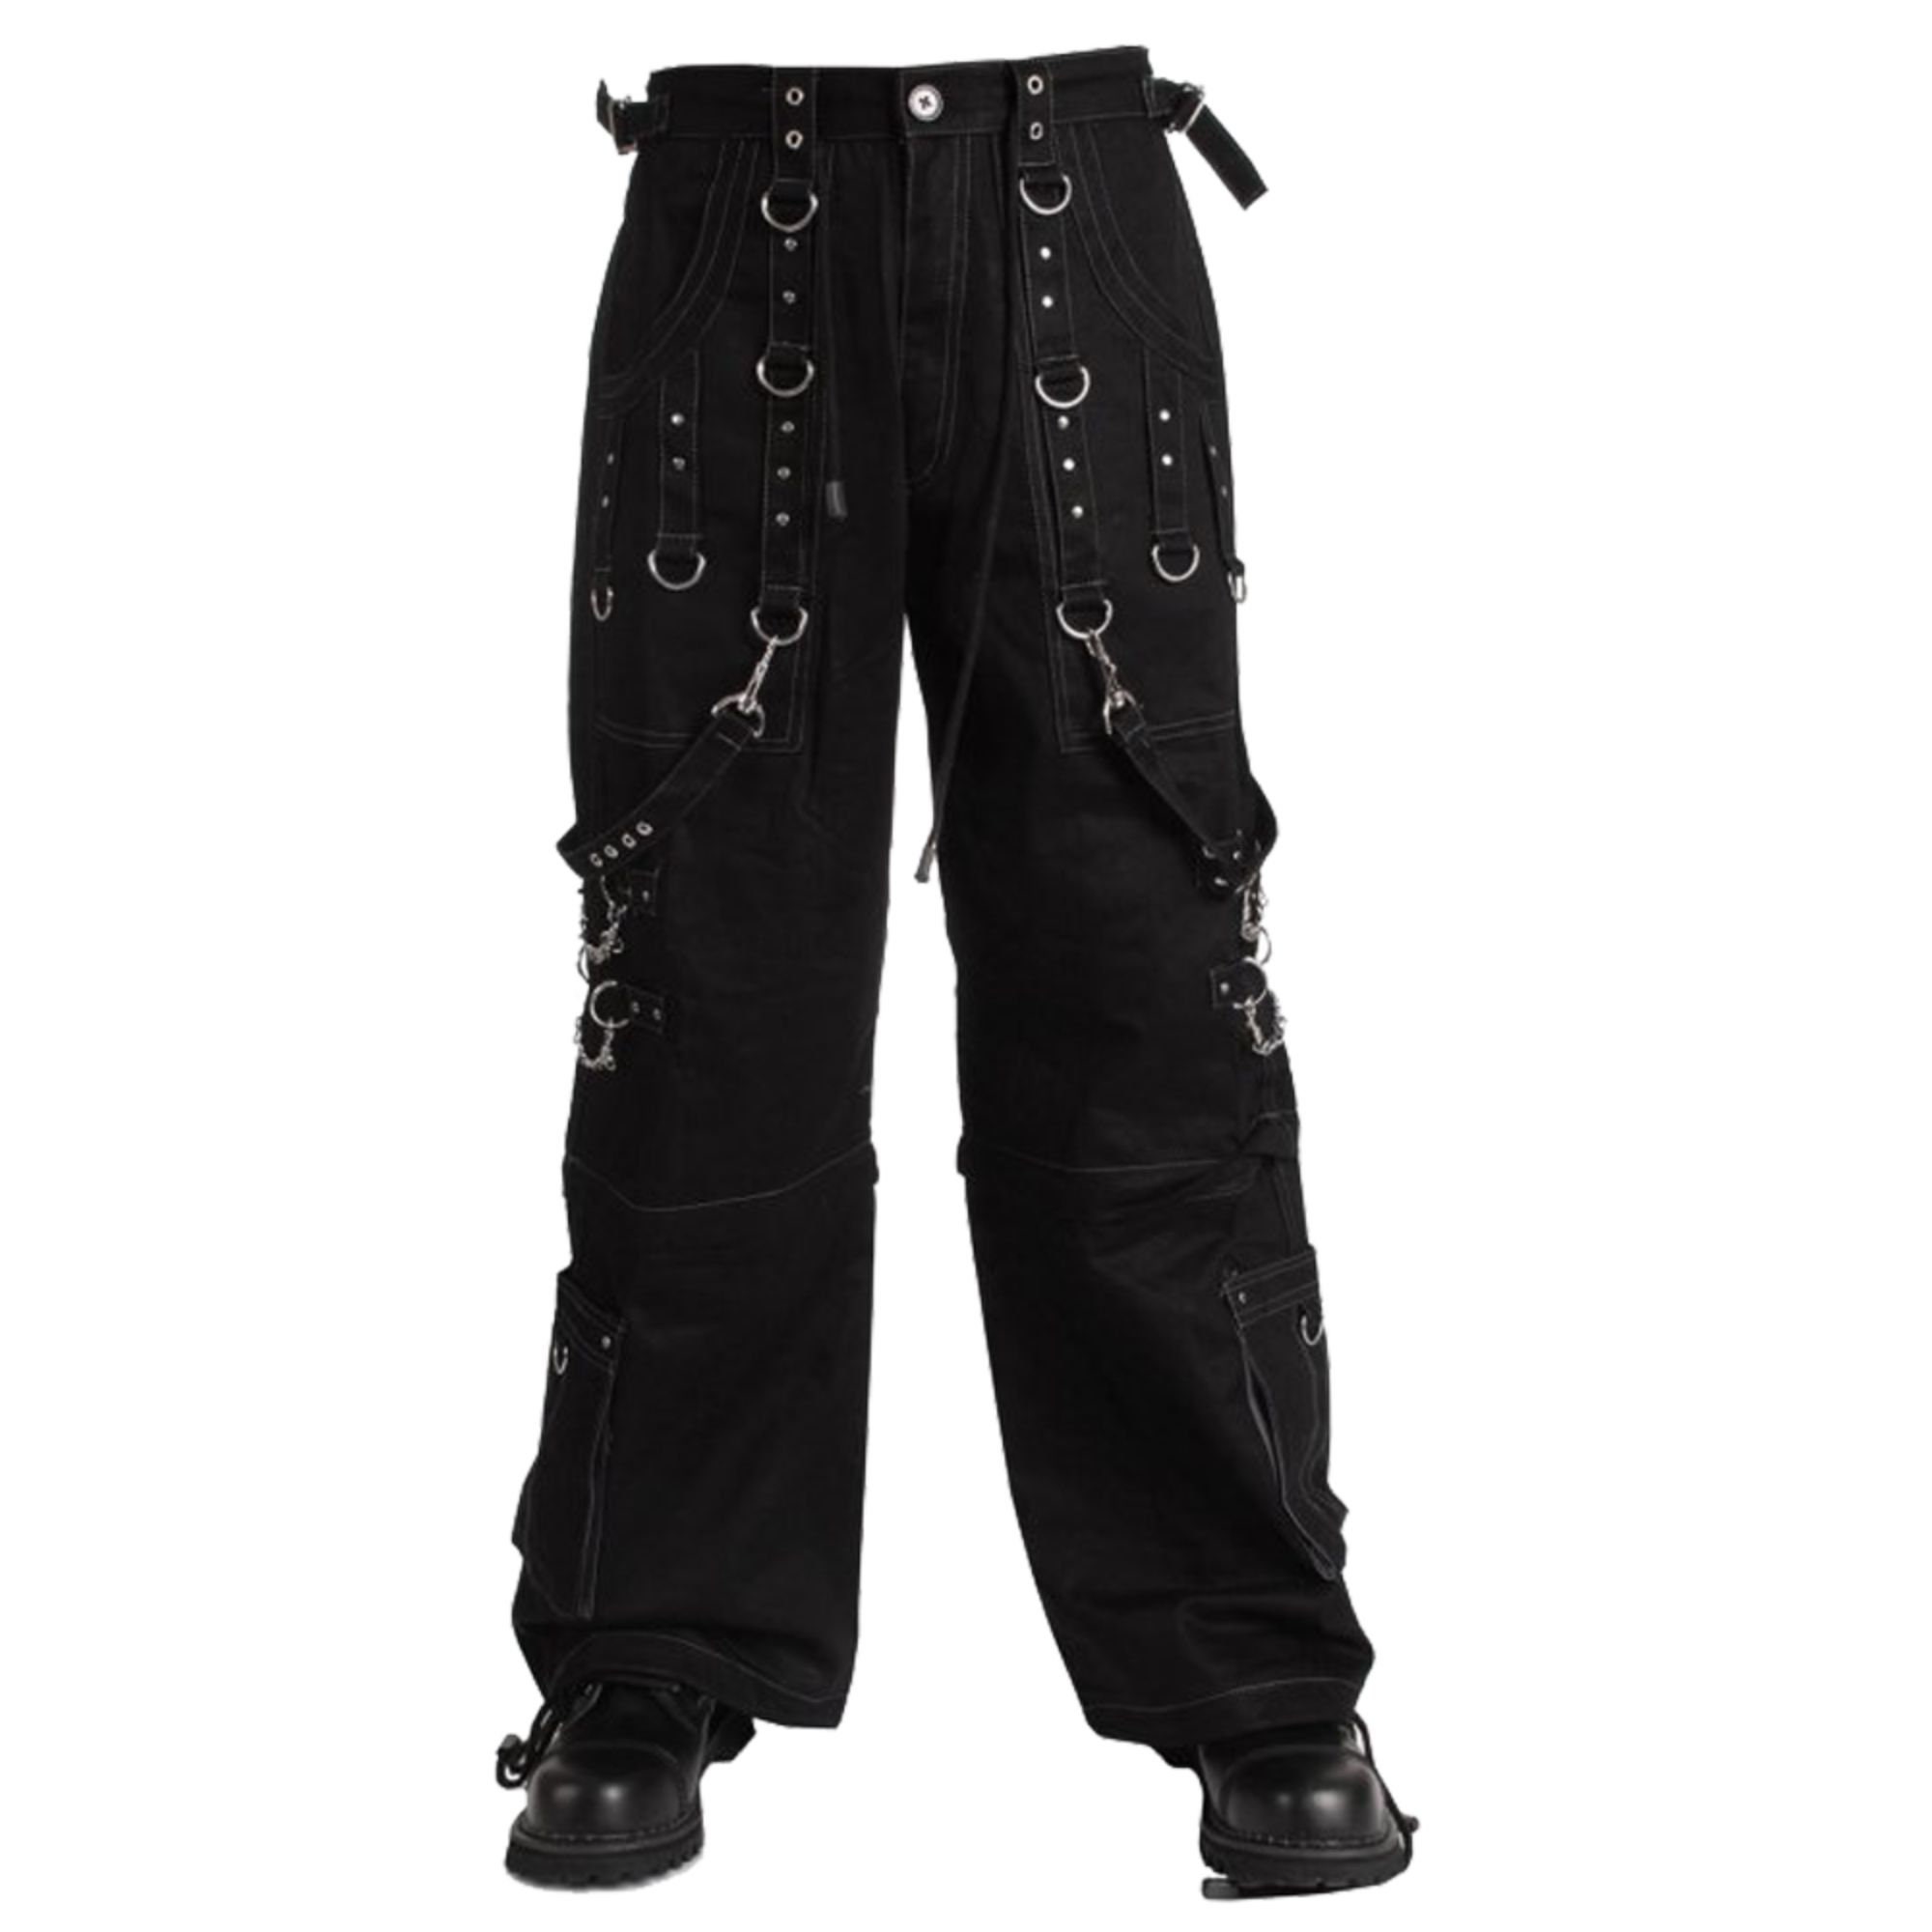 GOTH PANT, Goth Cargo Pants, Gothic Trousers, Goth Pants Mens